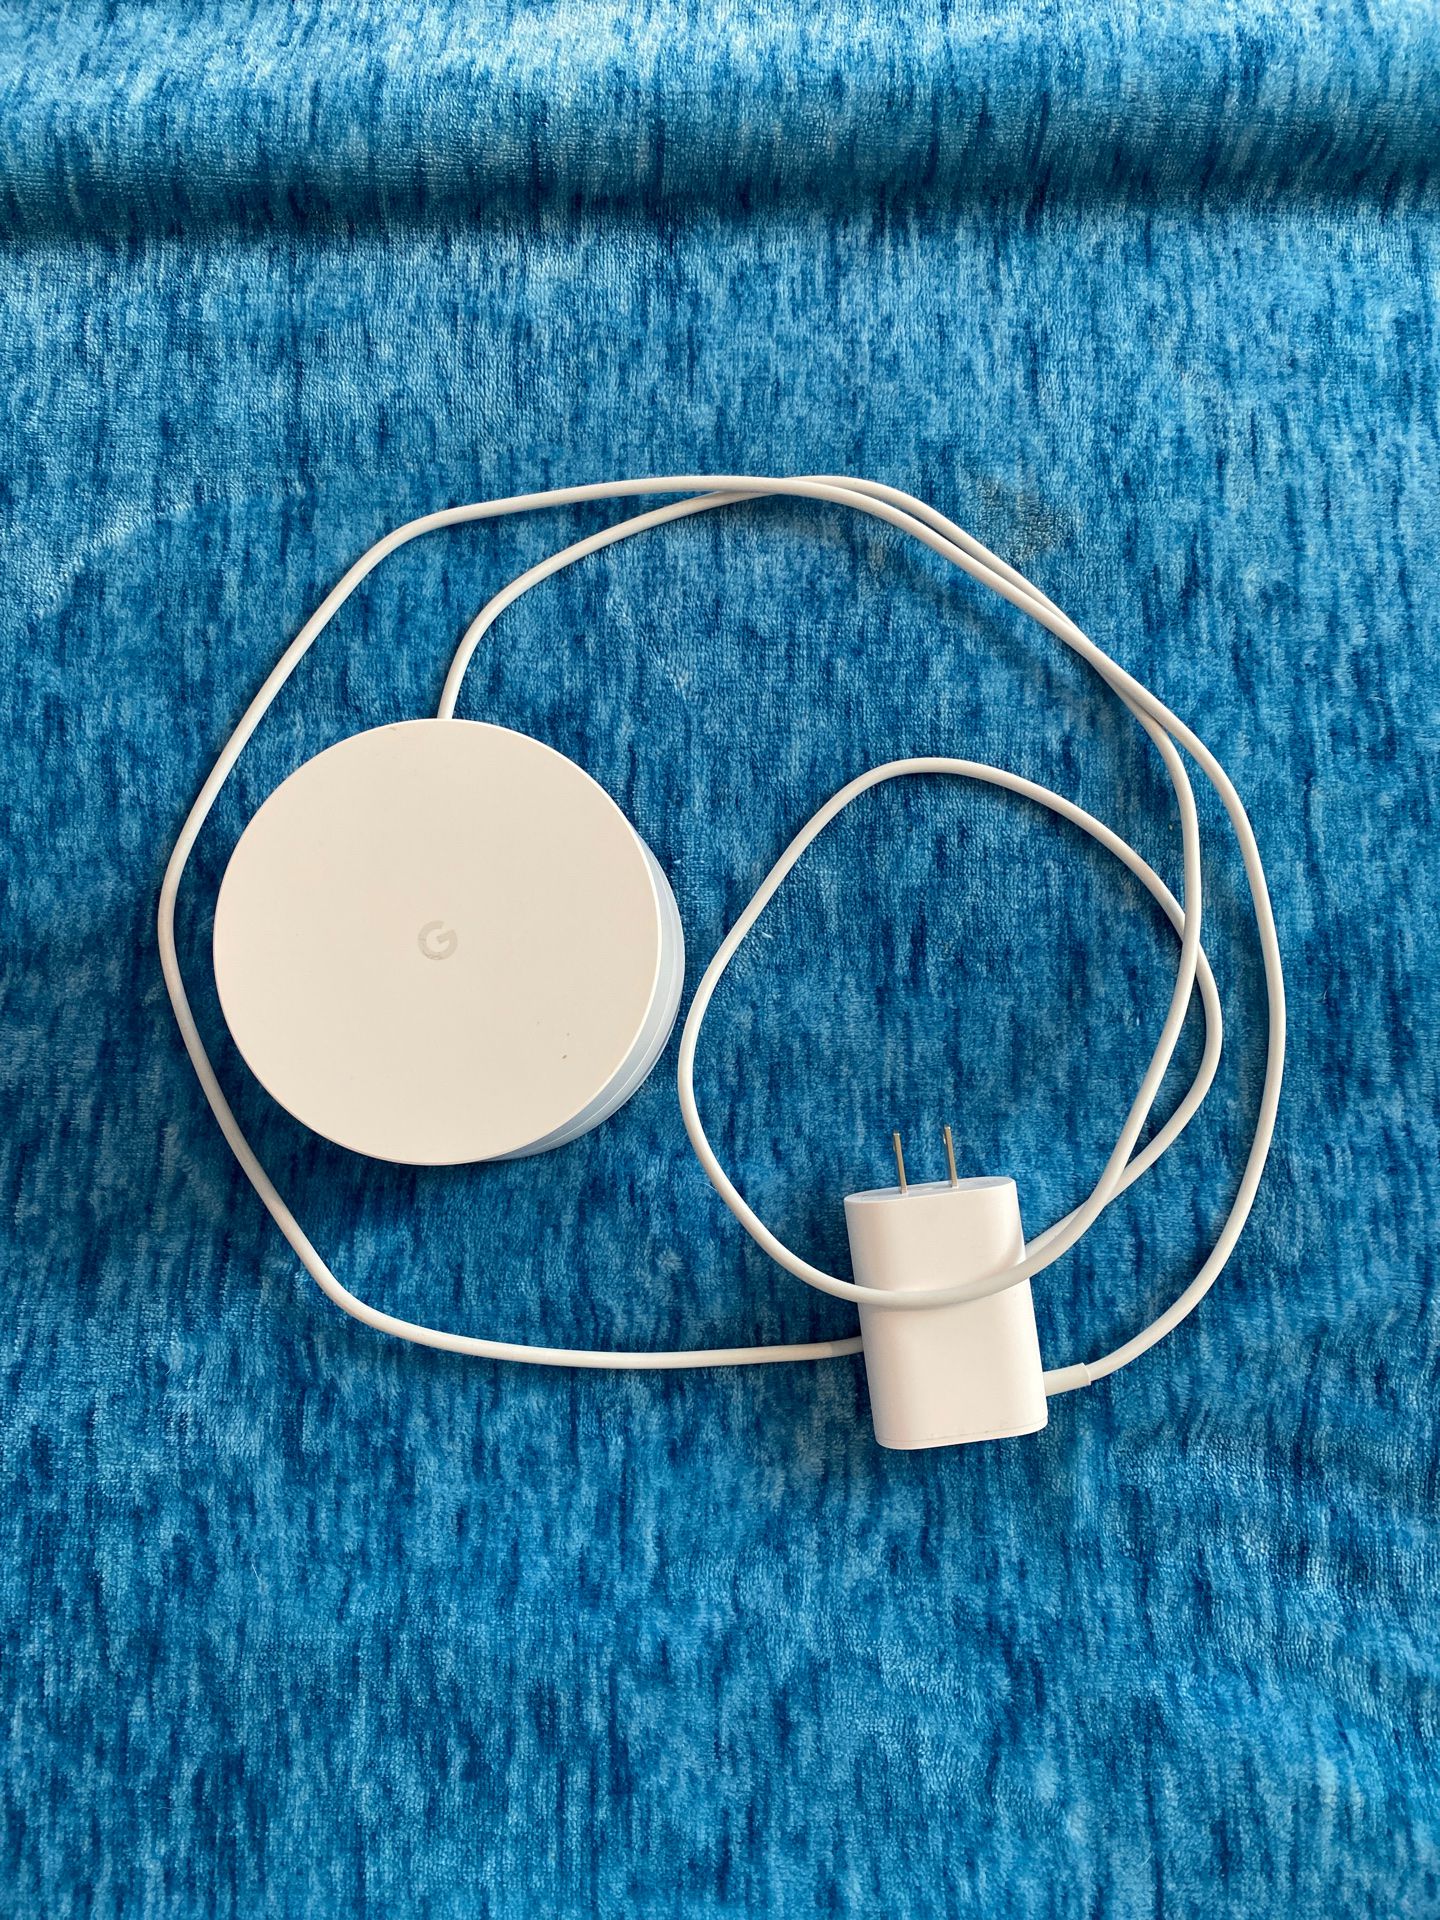 One Google WiFi router